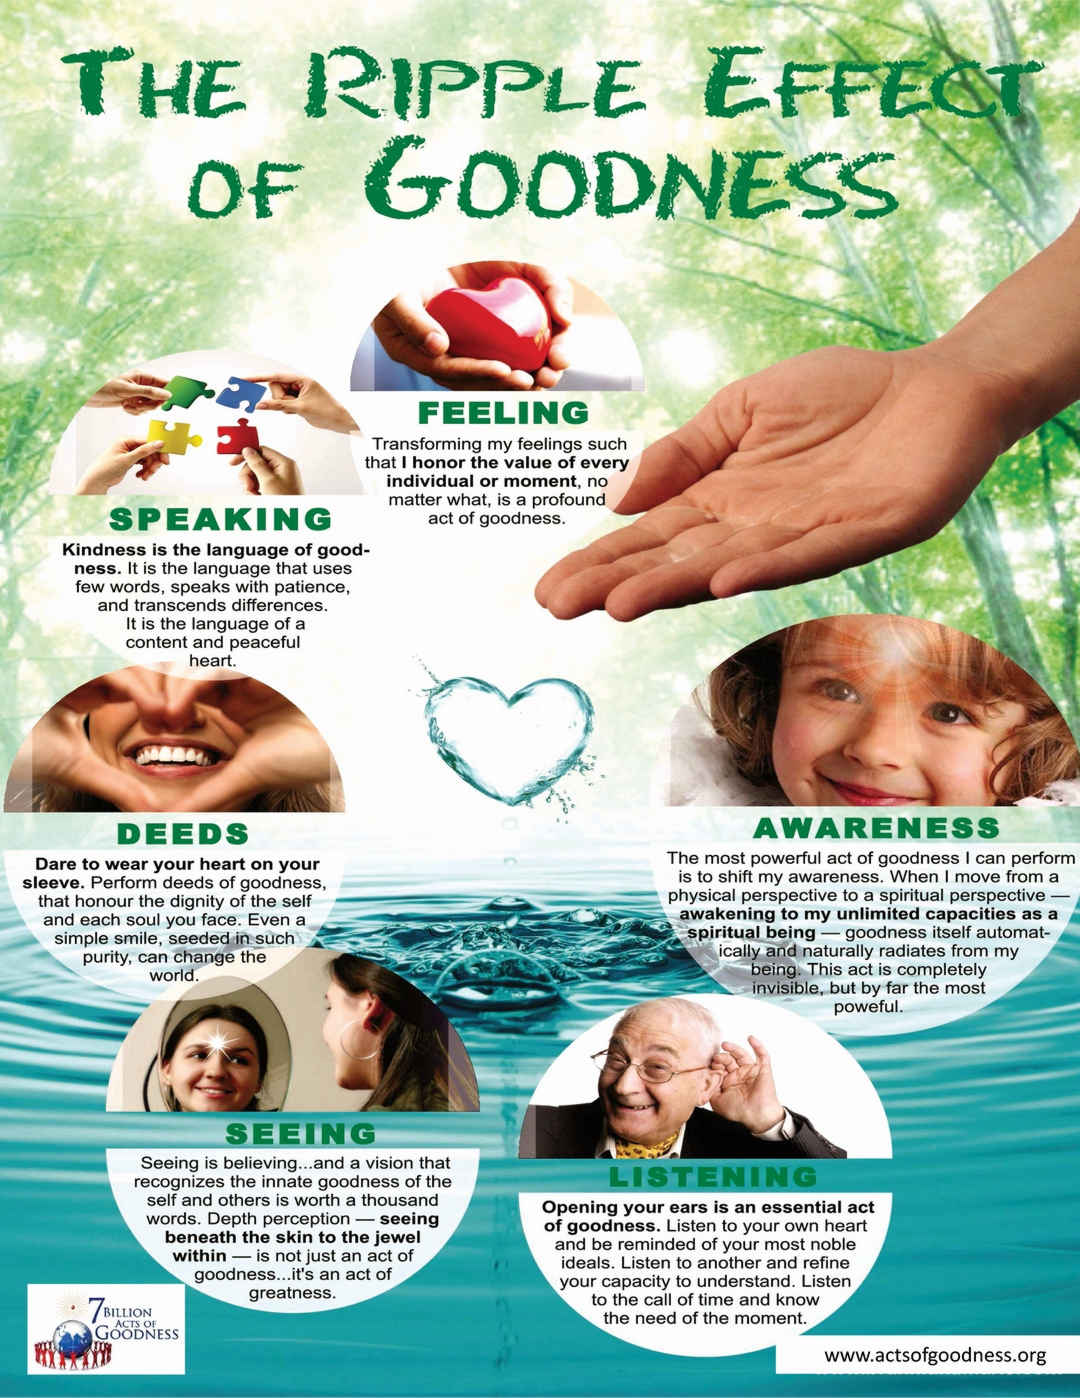 7 bn acts of goodness - 4